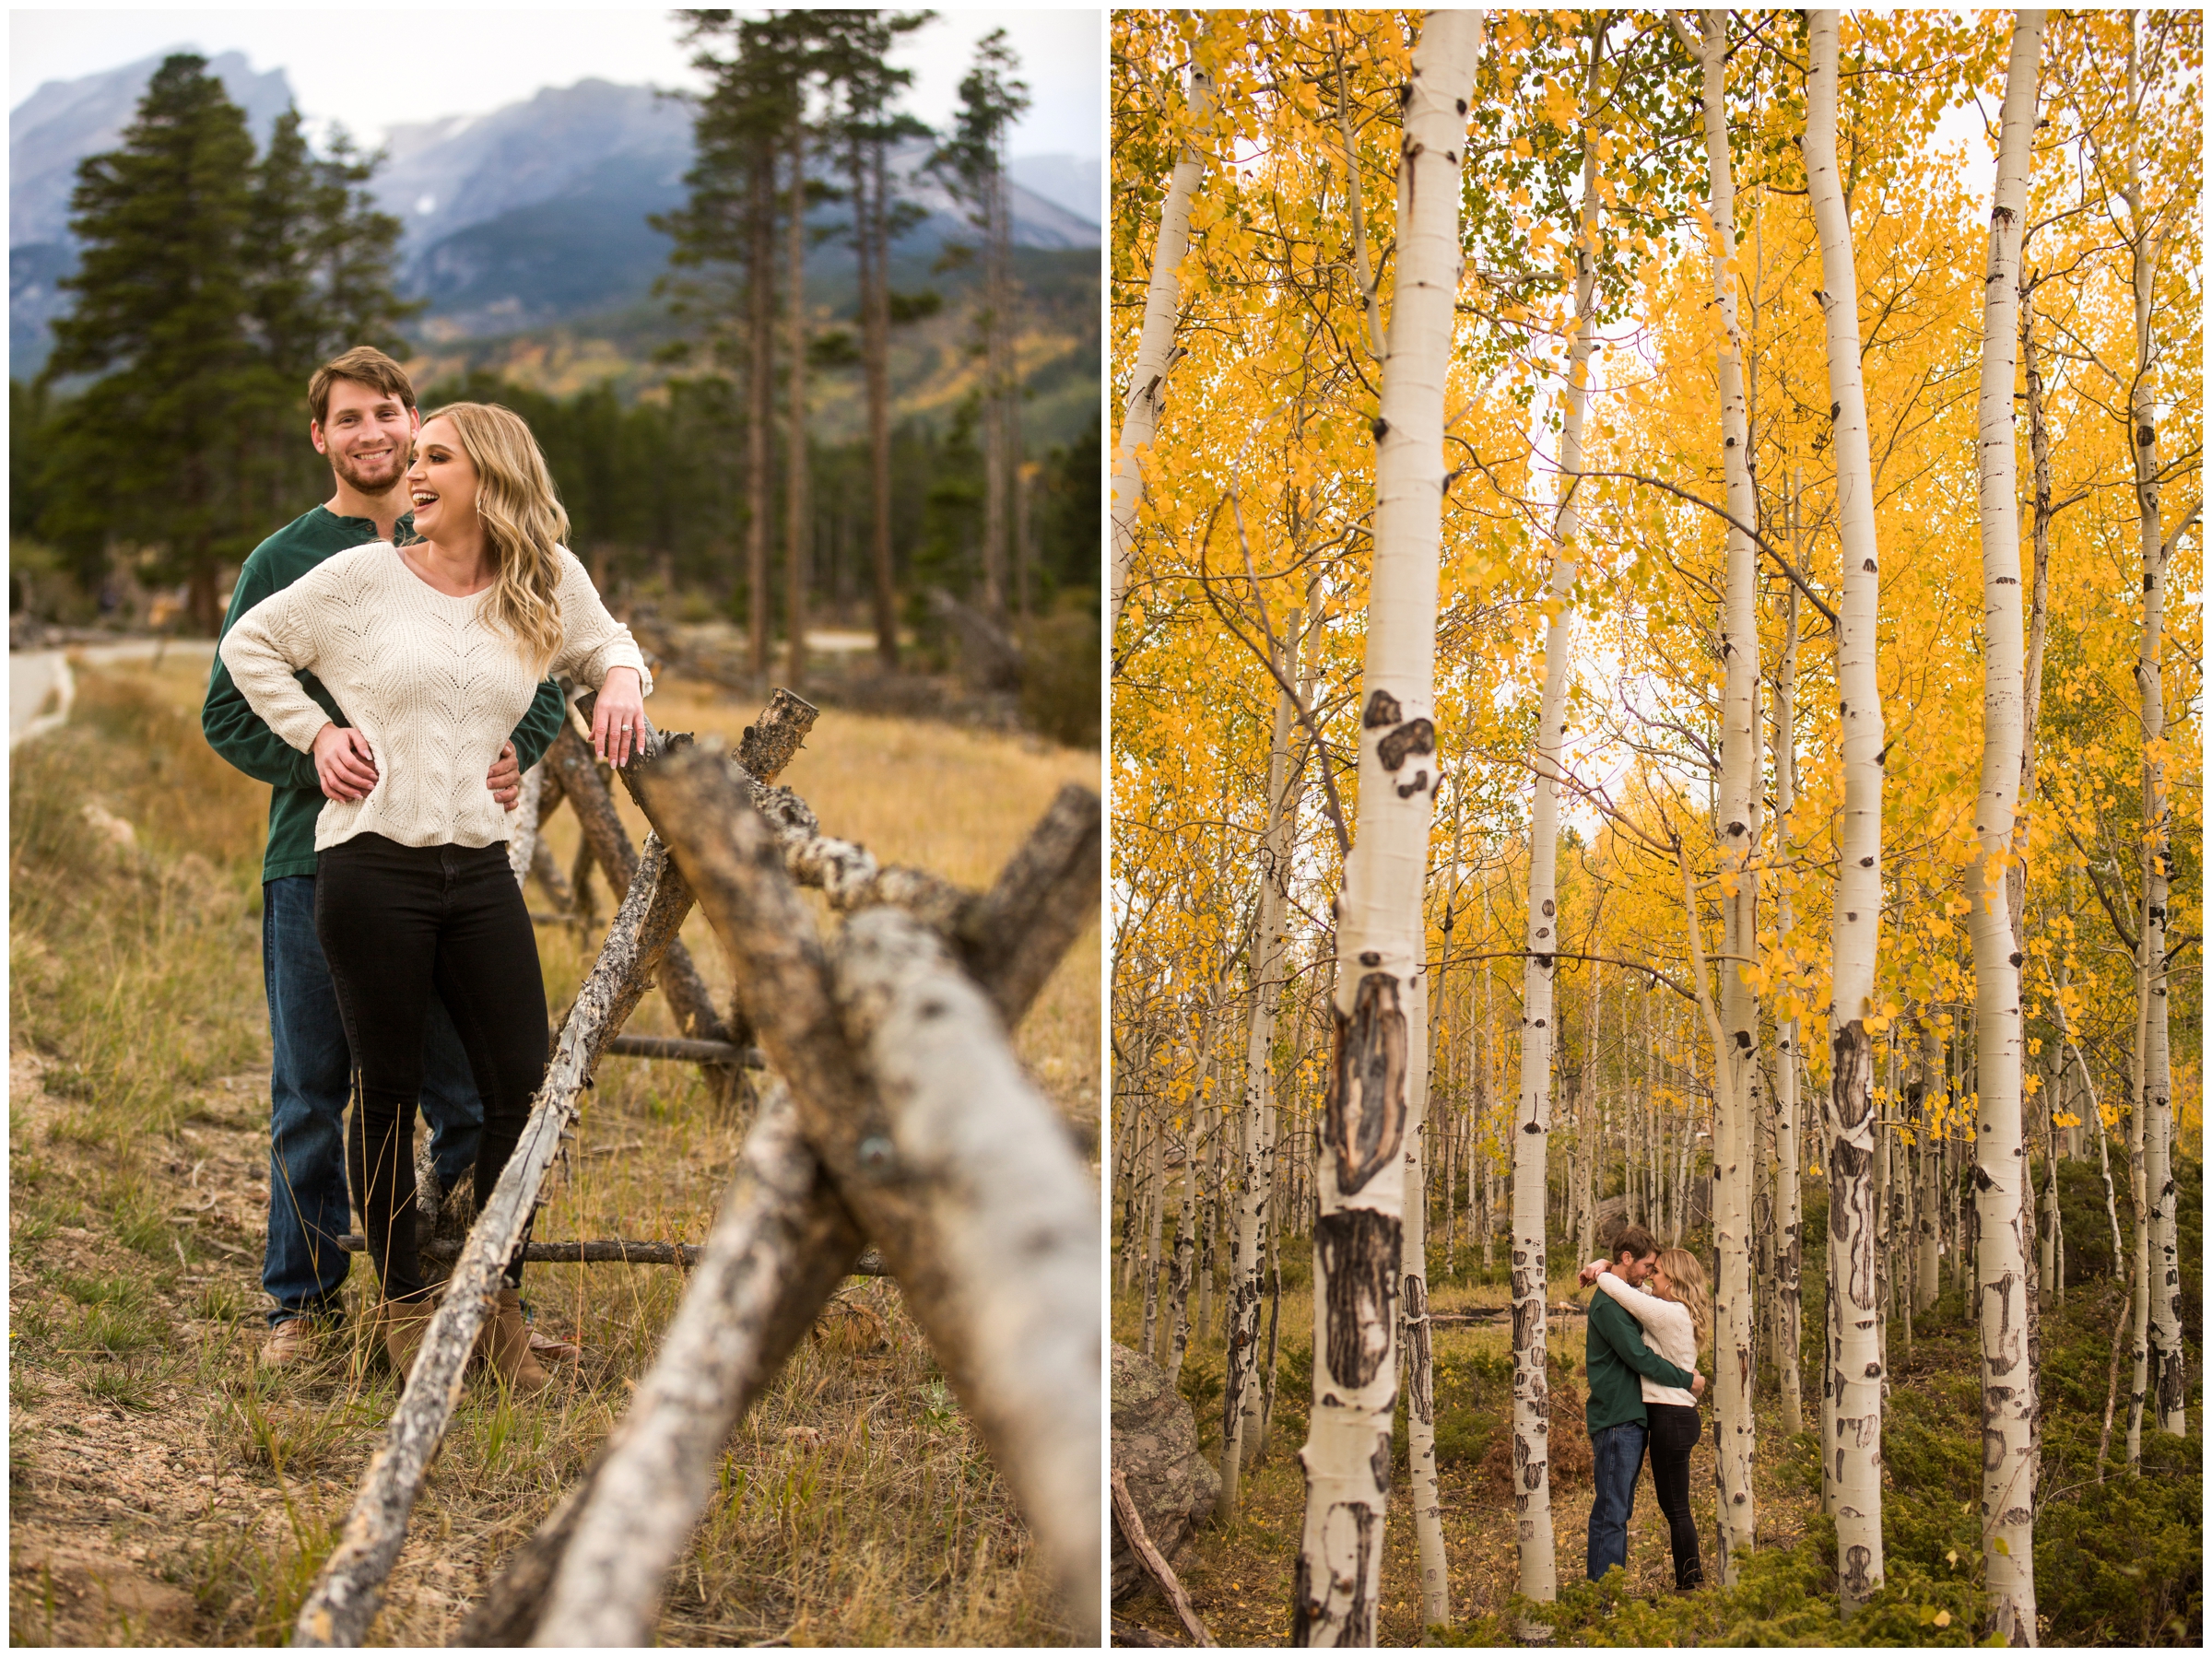 Couples portraits in aspen grove in CO mountains 